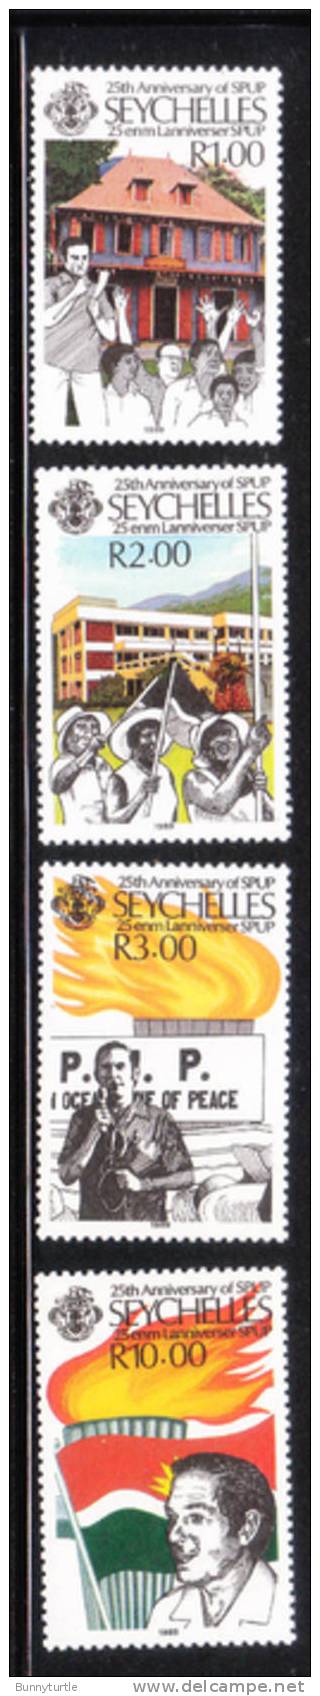 Seychelles 1989 People's United Party SPUP 25th Anniversary MNH - Seychellen (1976-...)